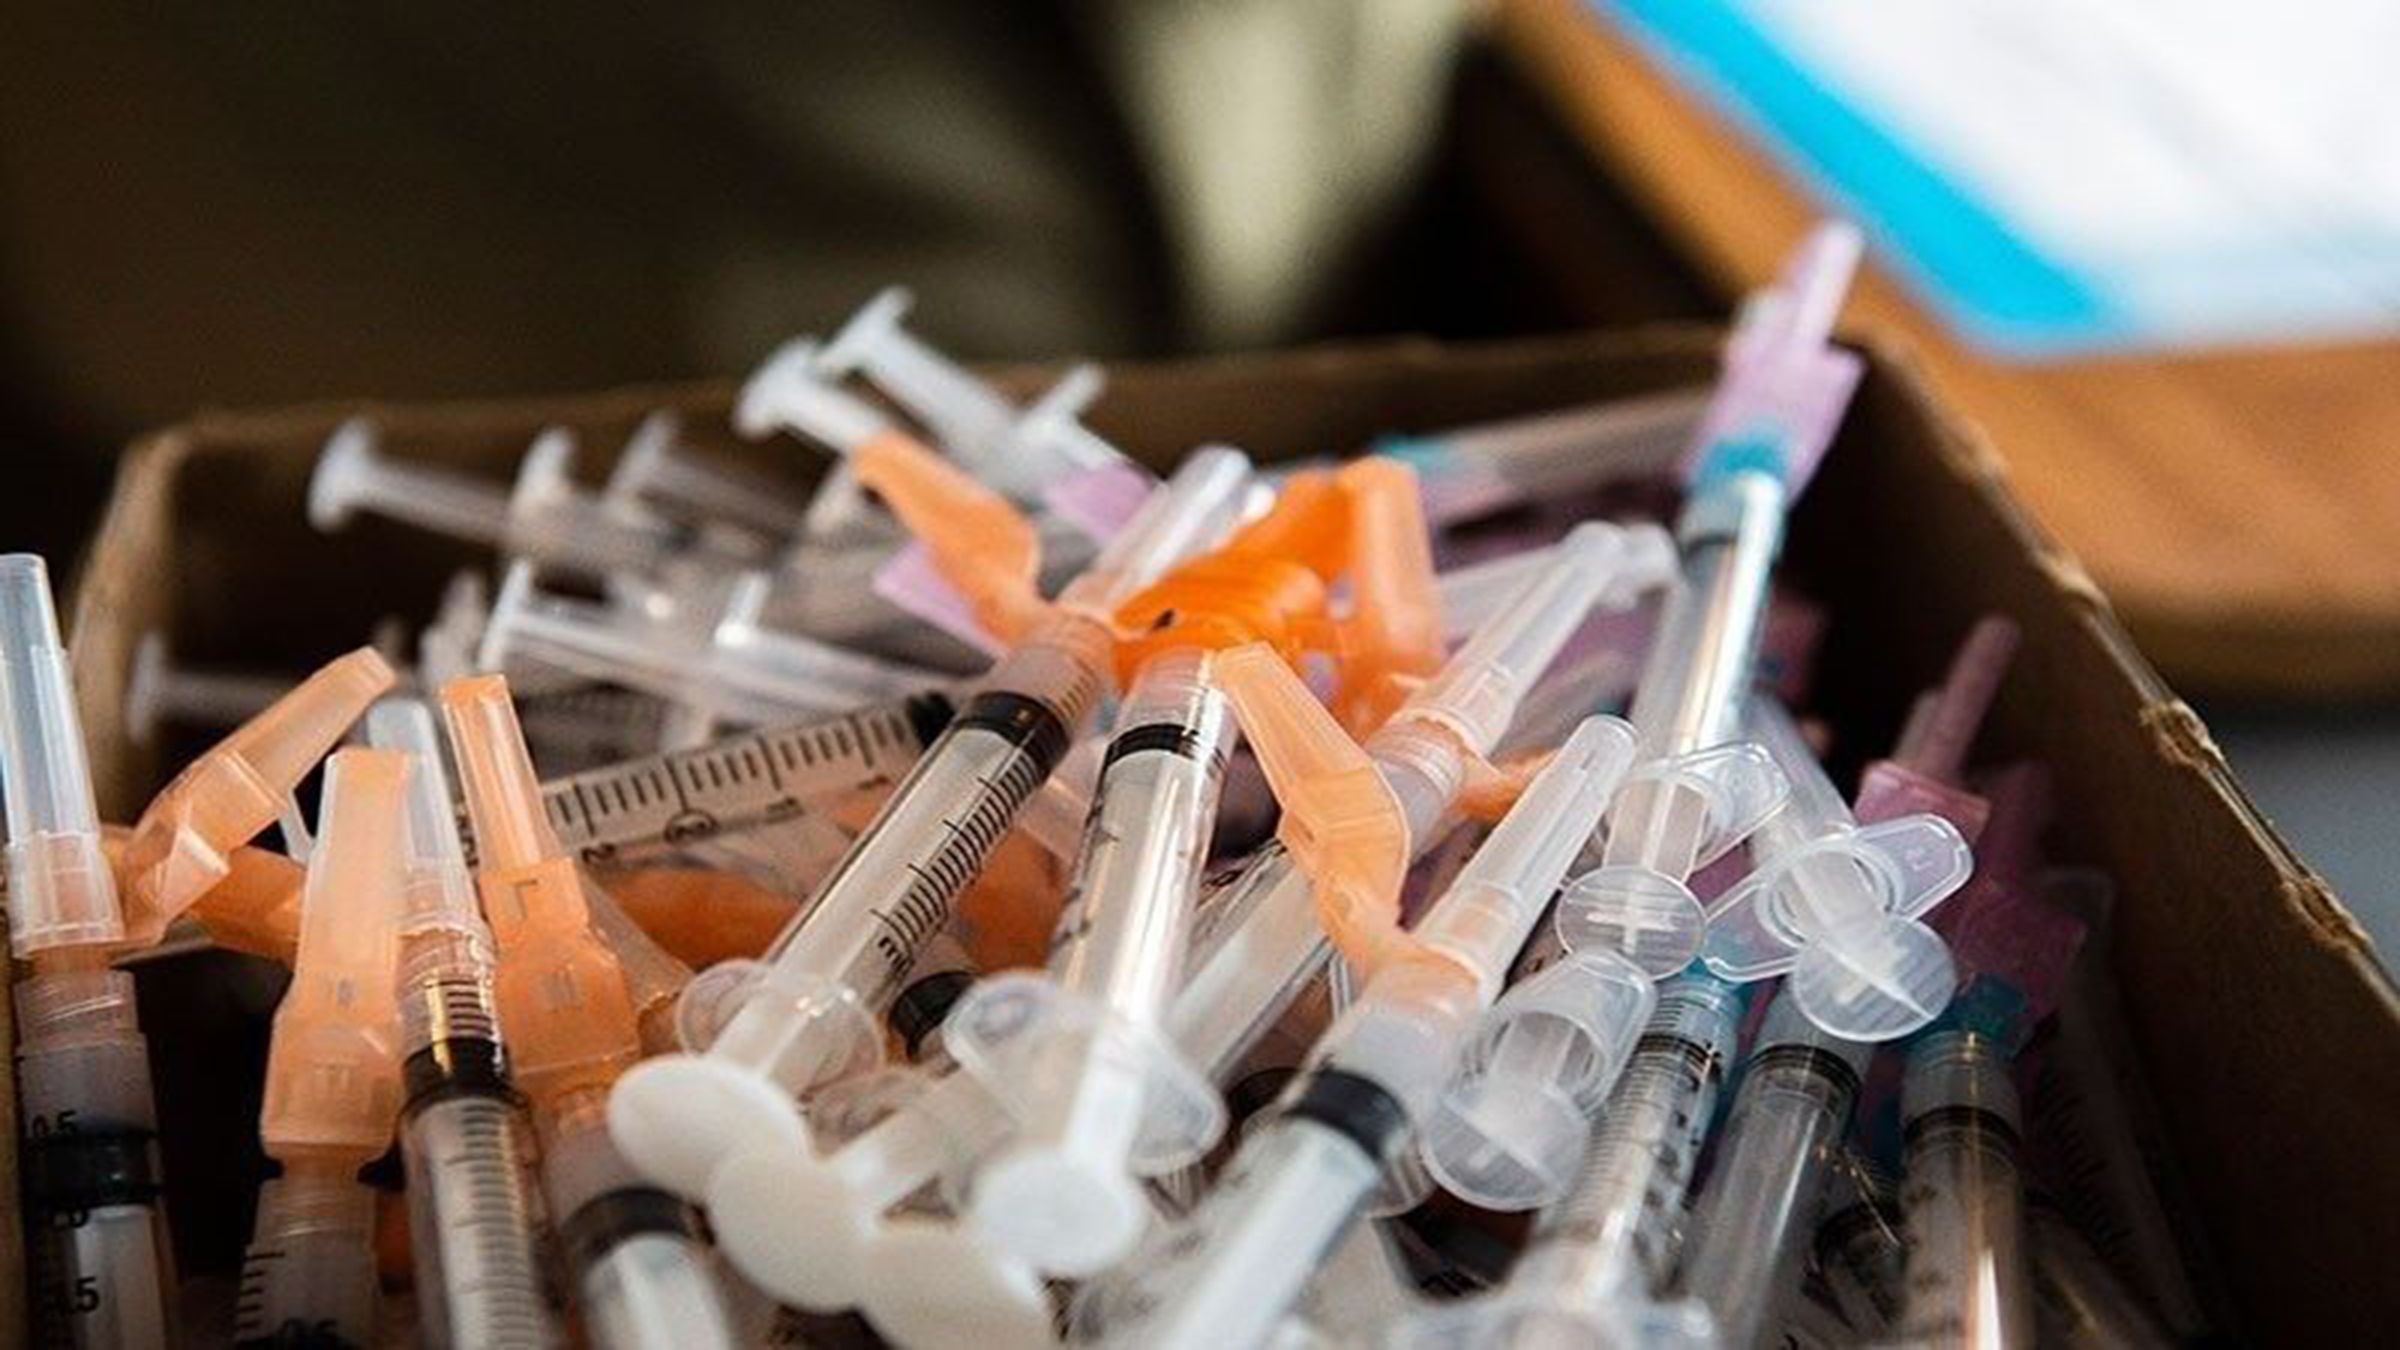 31 million doses of COVID vaccines were wasted